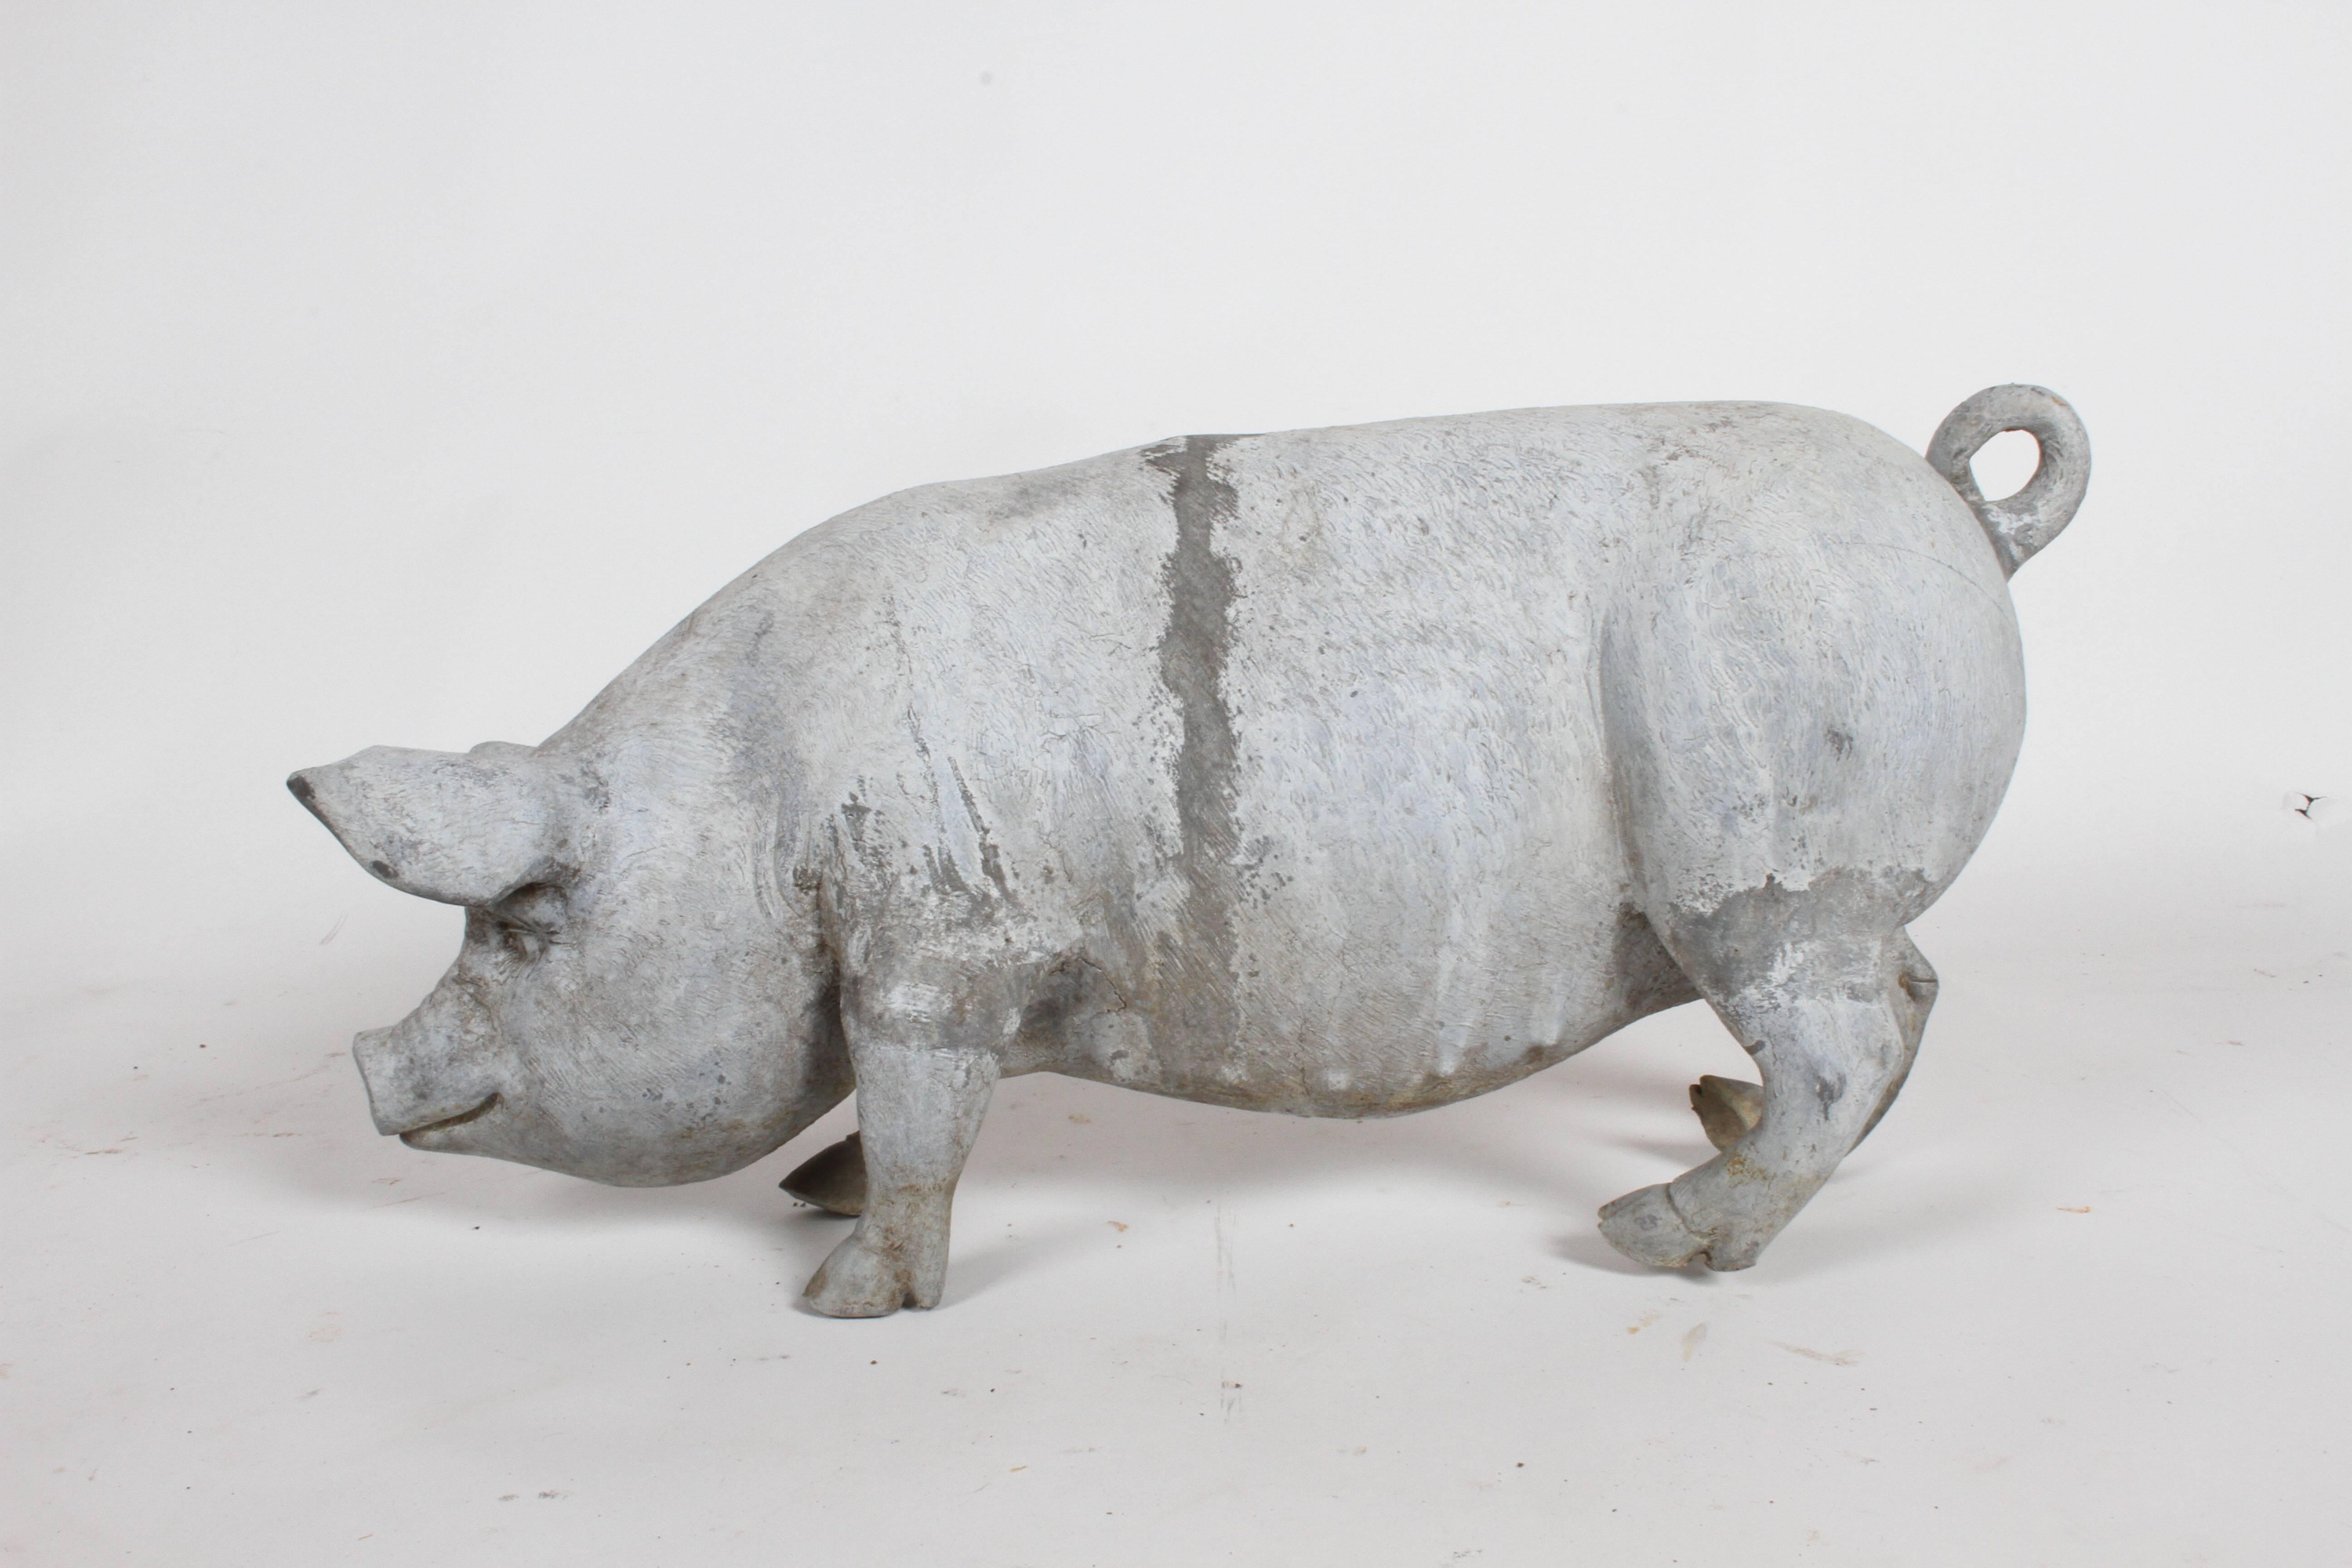 Large English lead pig garden ornament / sculpture, circa 1950s. Very heavy.